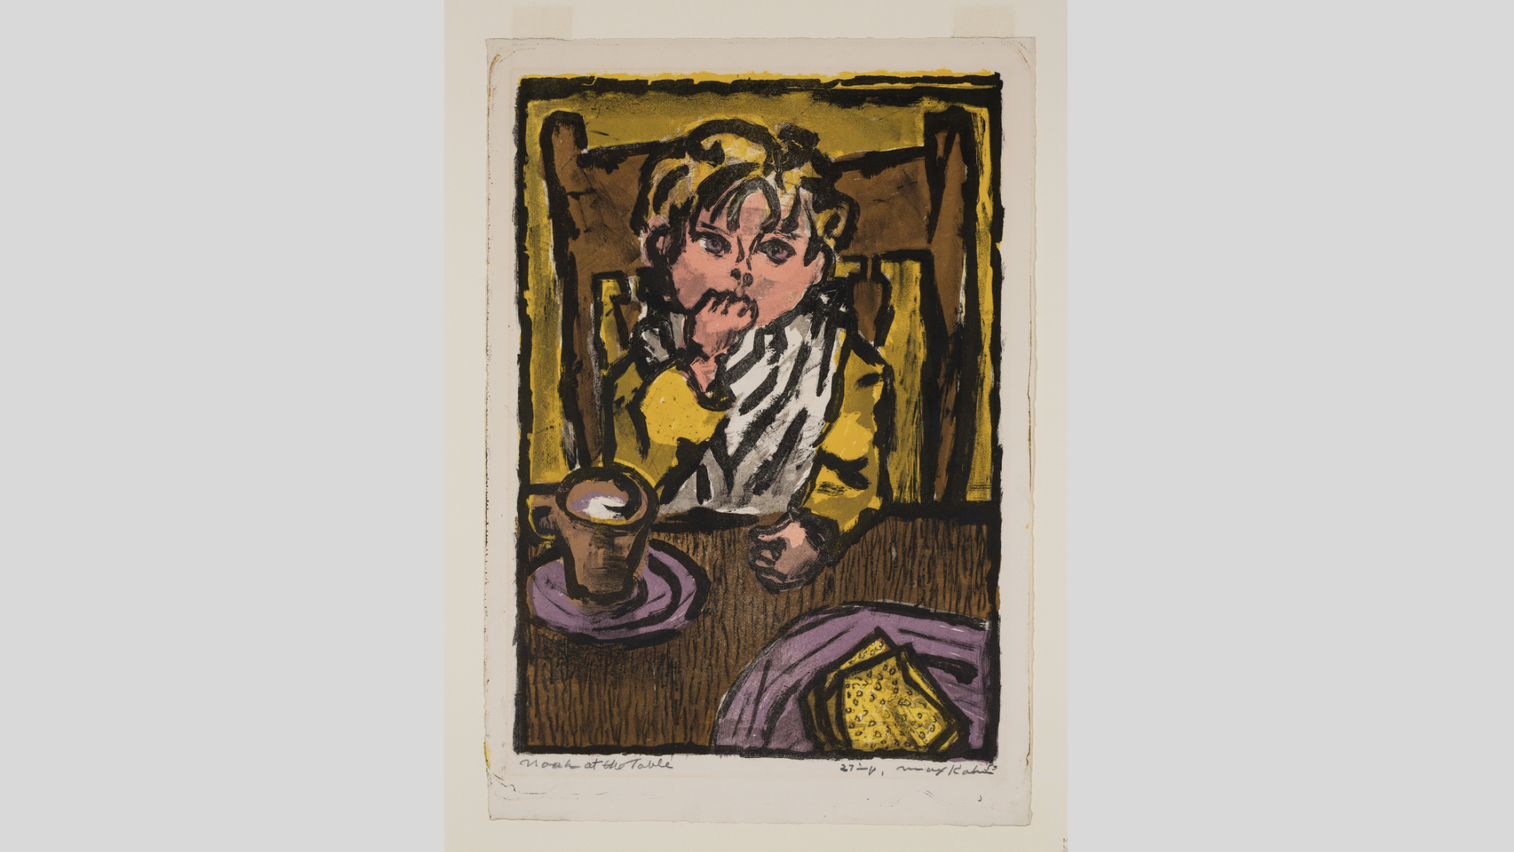 Image on gray background: painting of young blond boy sitting at dinner table with mug and plate of food